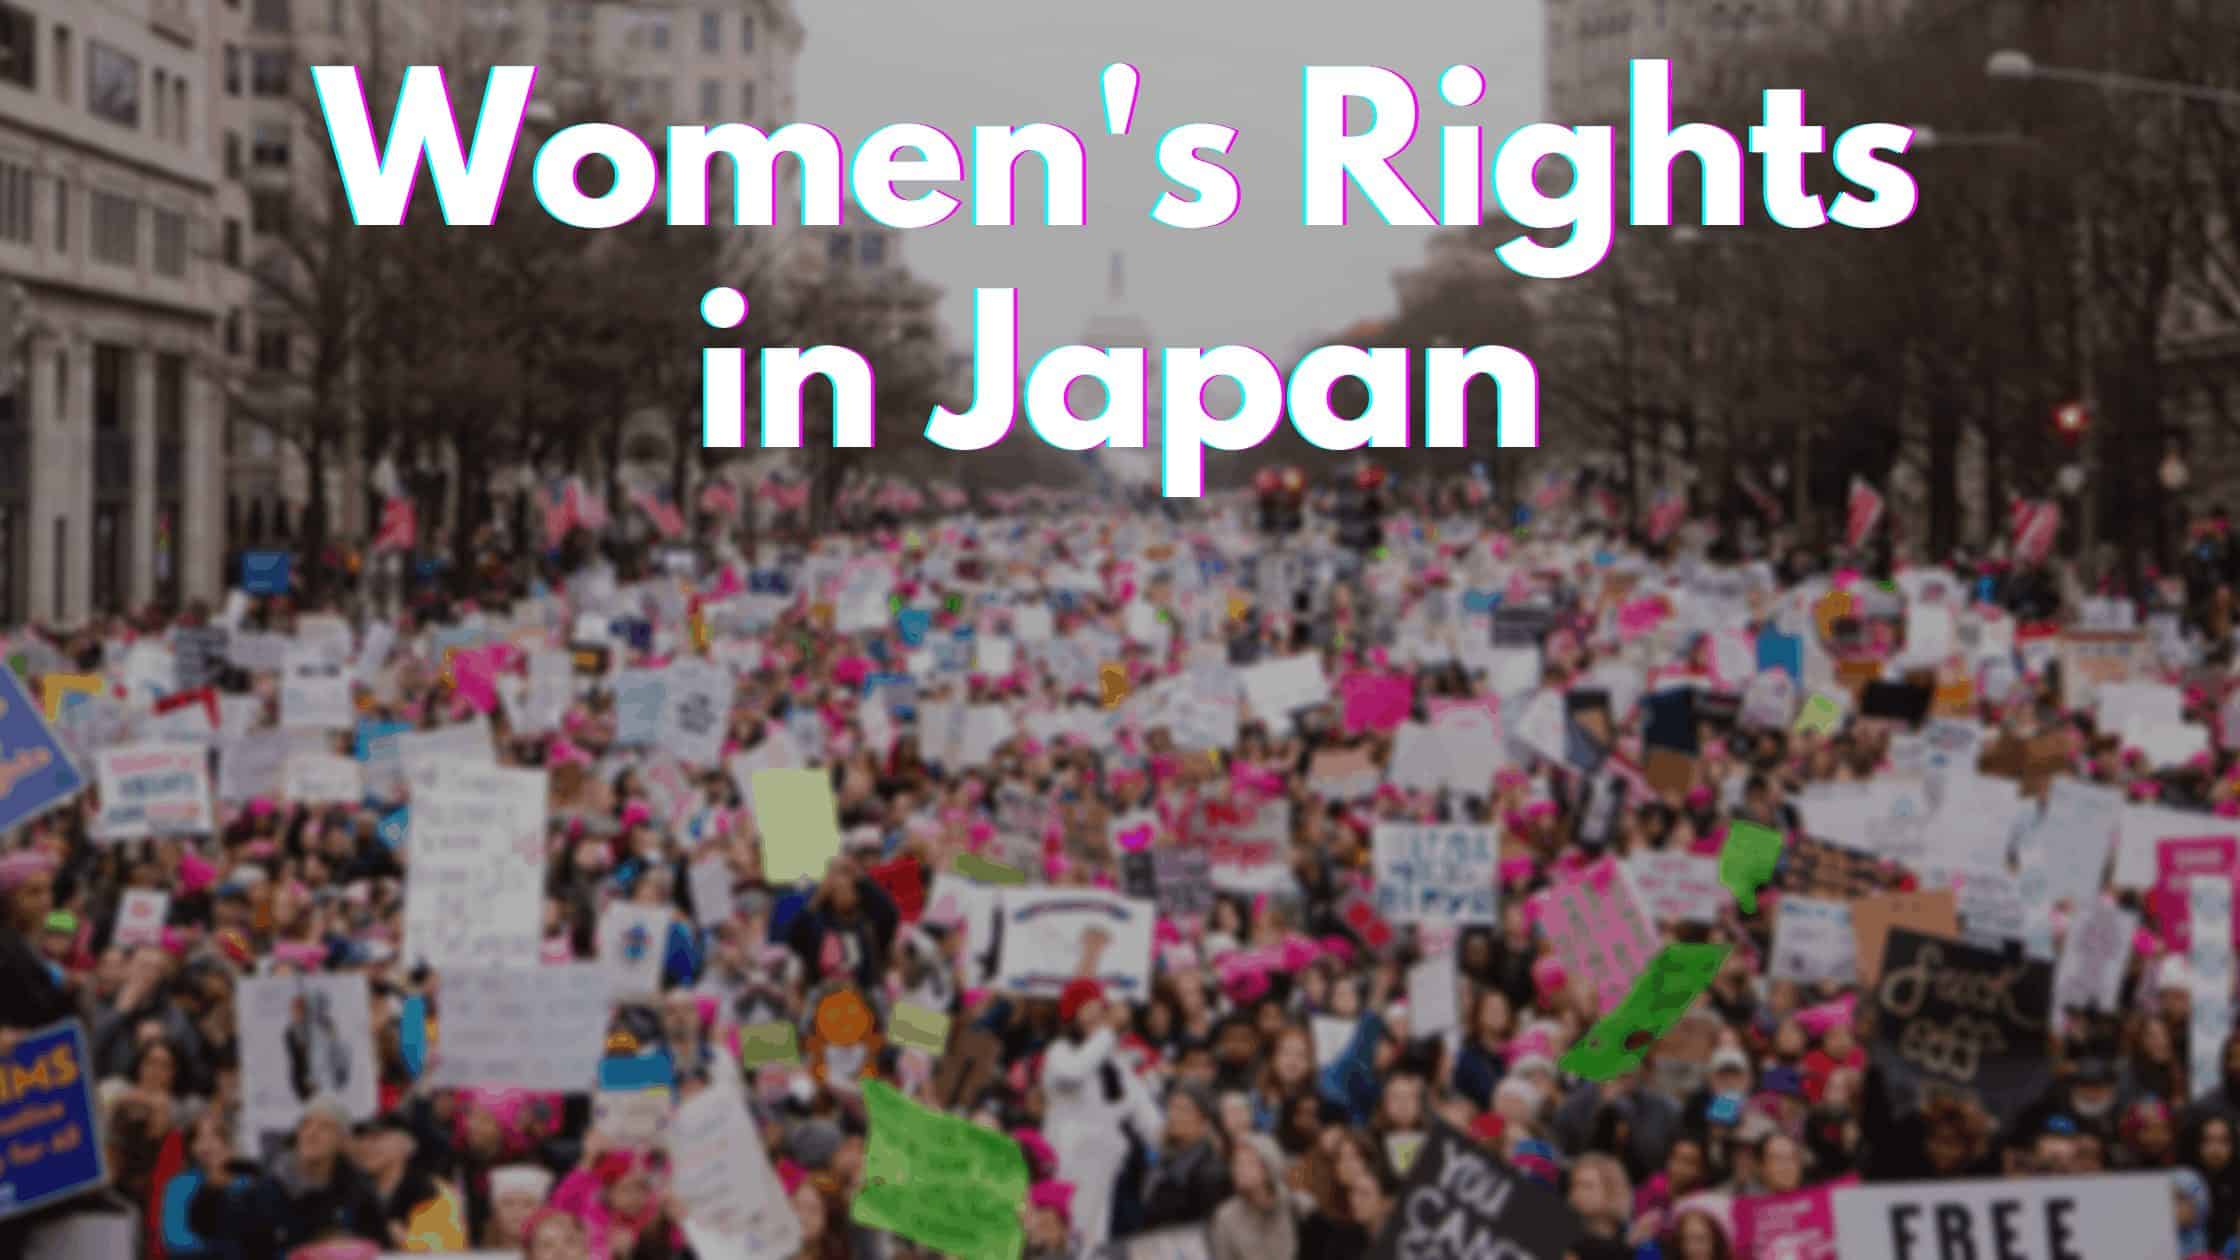 where does japan stand in its approach to women's rights